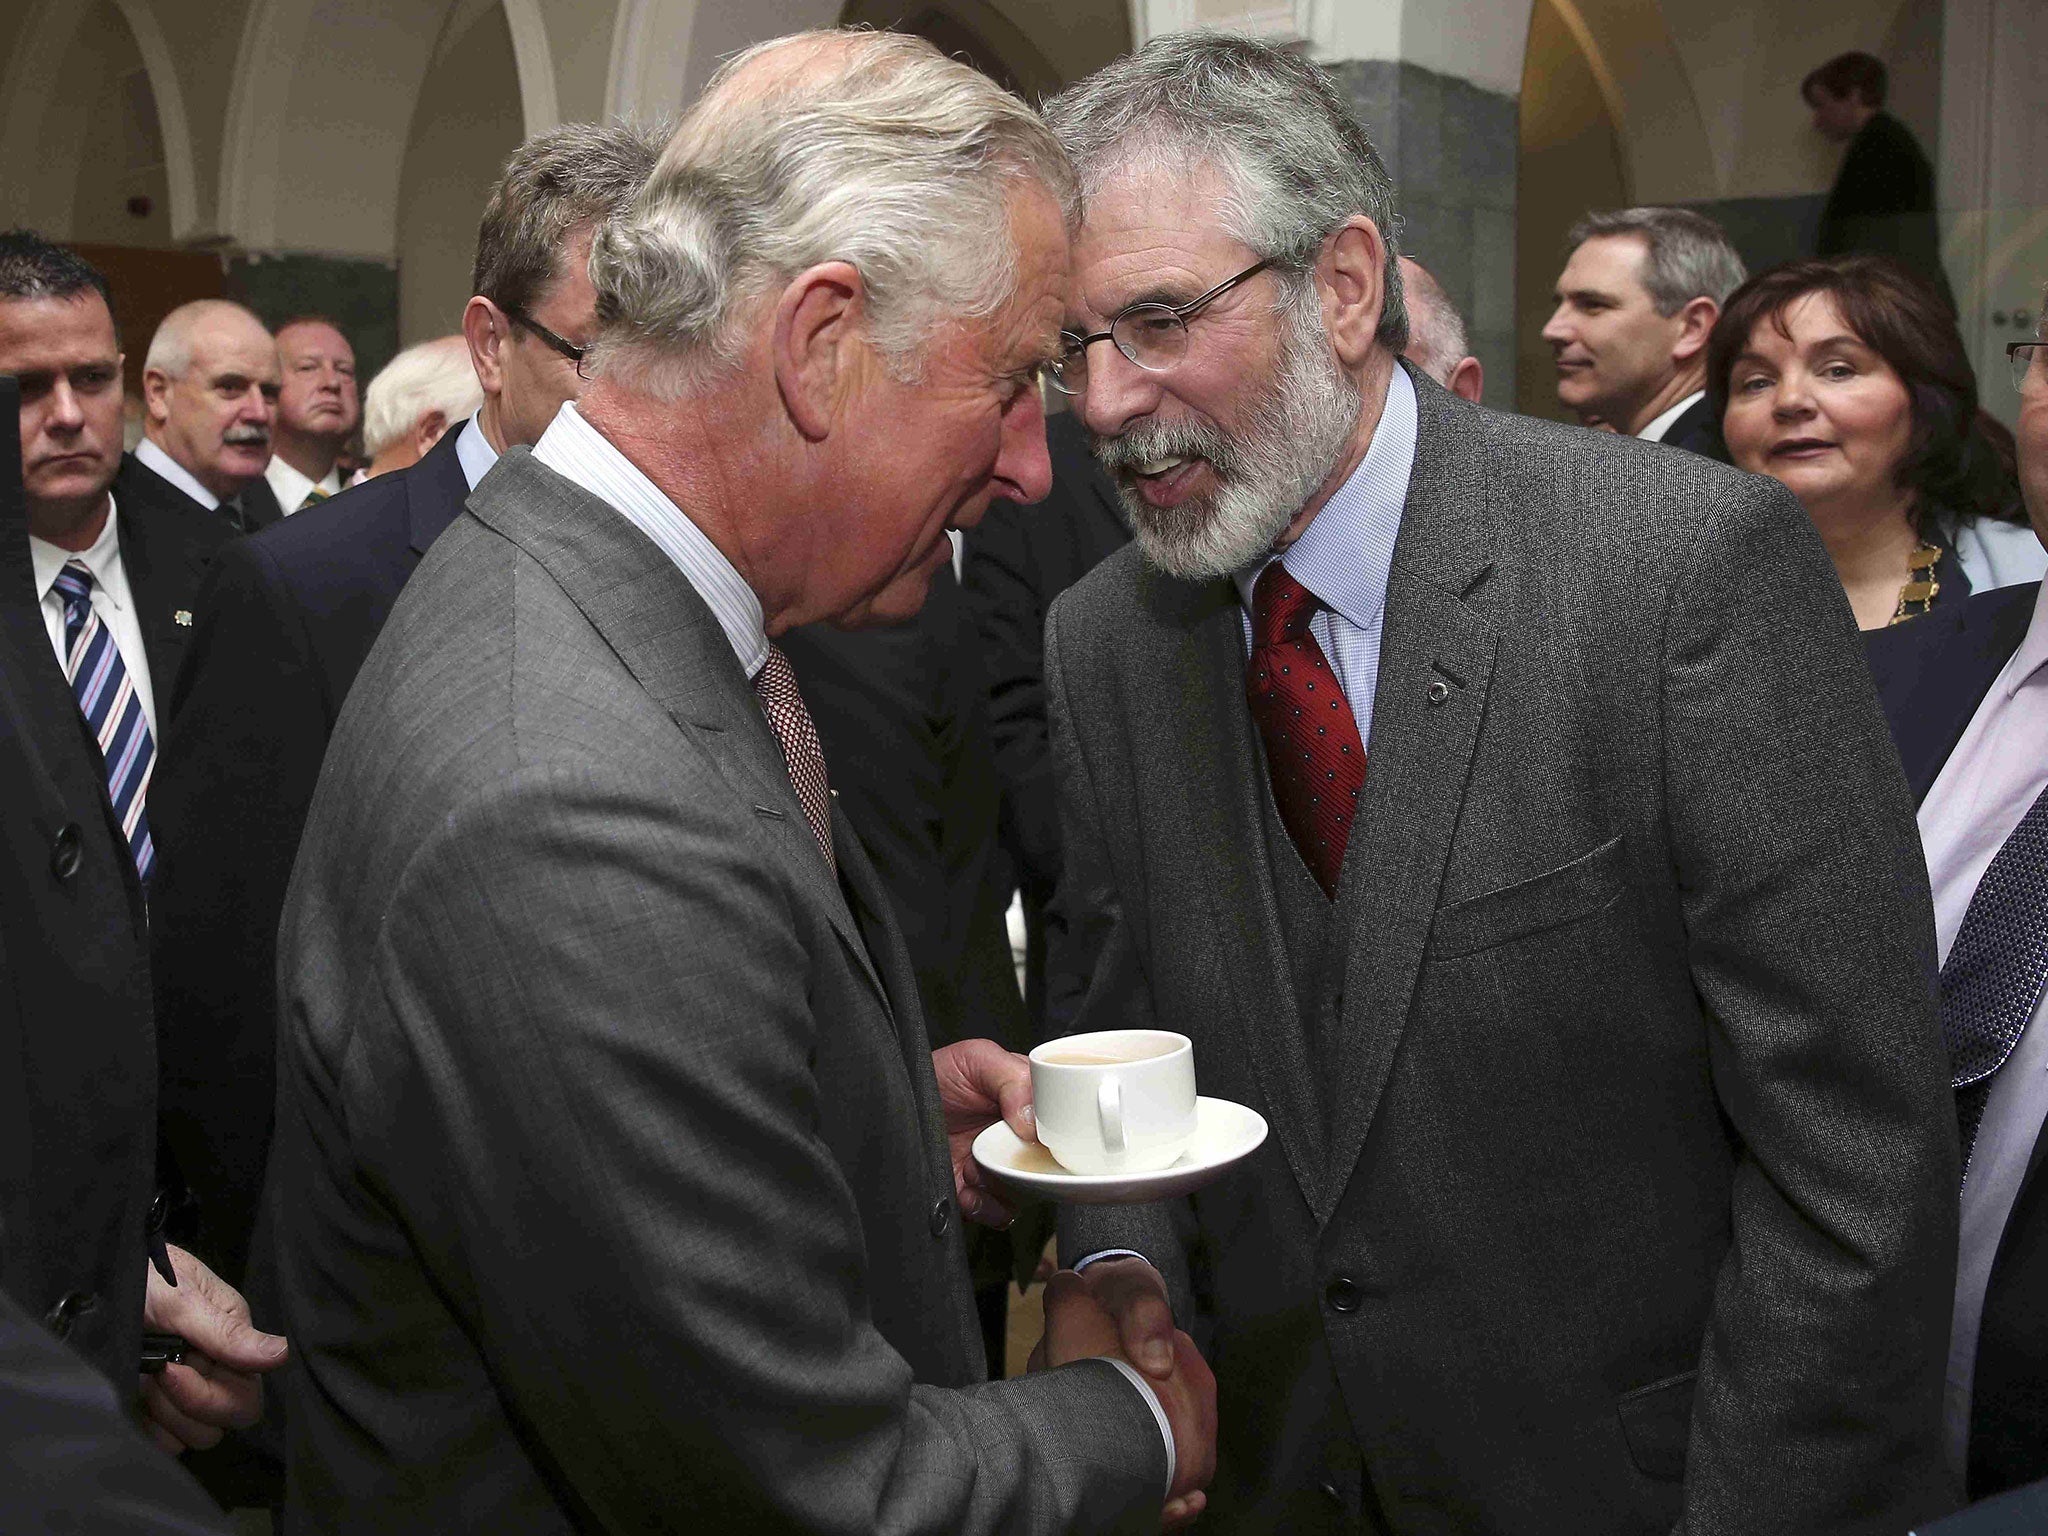 Britain's Prince Charles (L) shakes hands with Gerry Adams at the National University of Ireland in Galway, Ireland May 19, 2015.